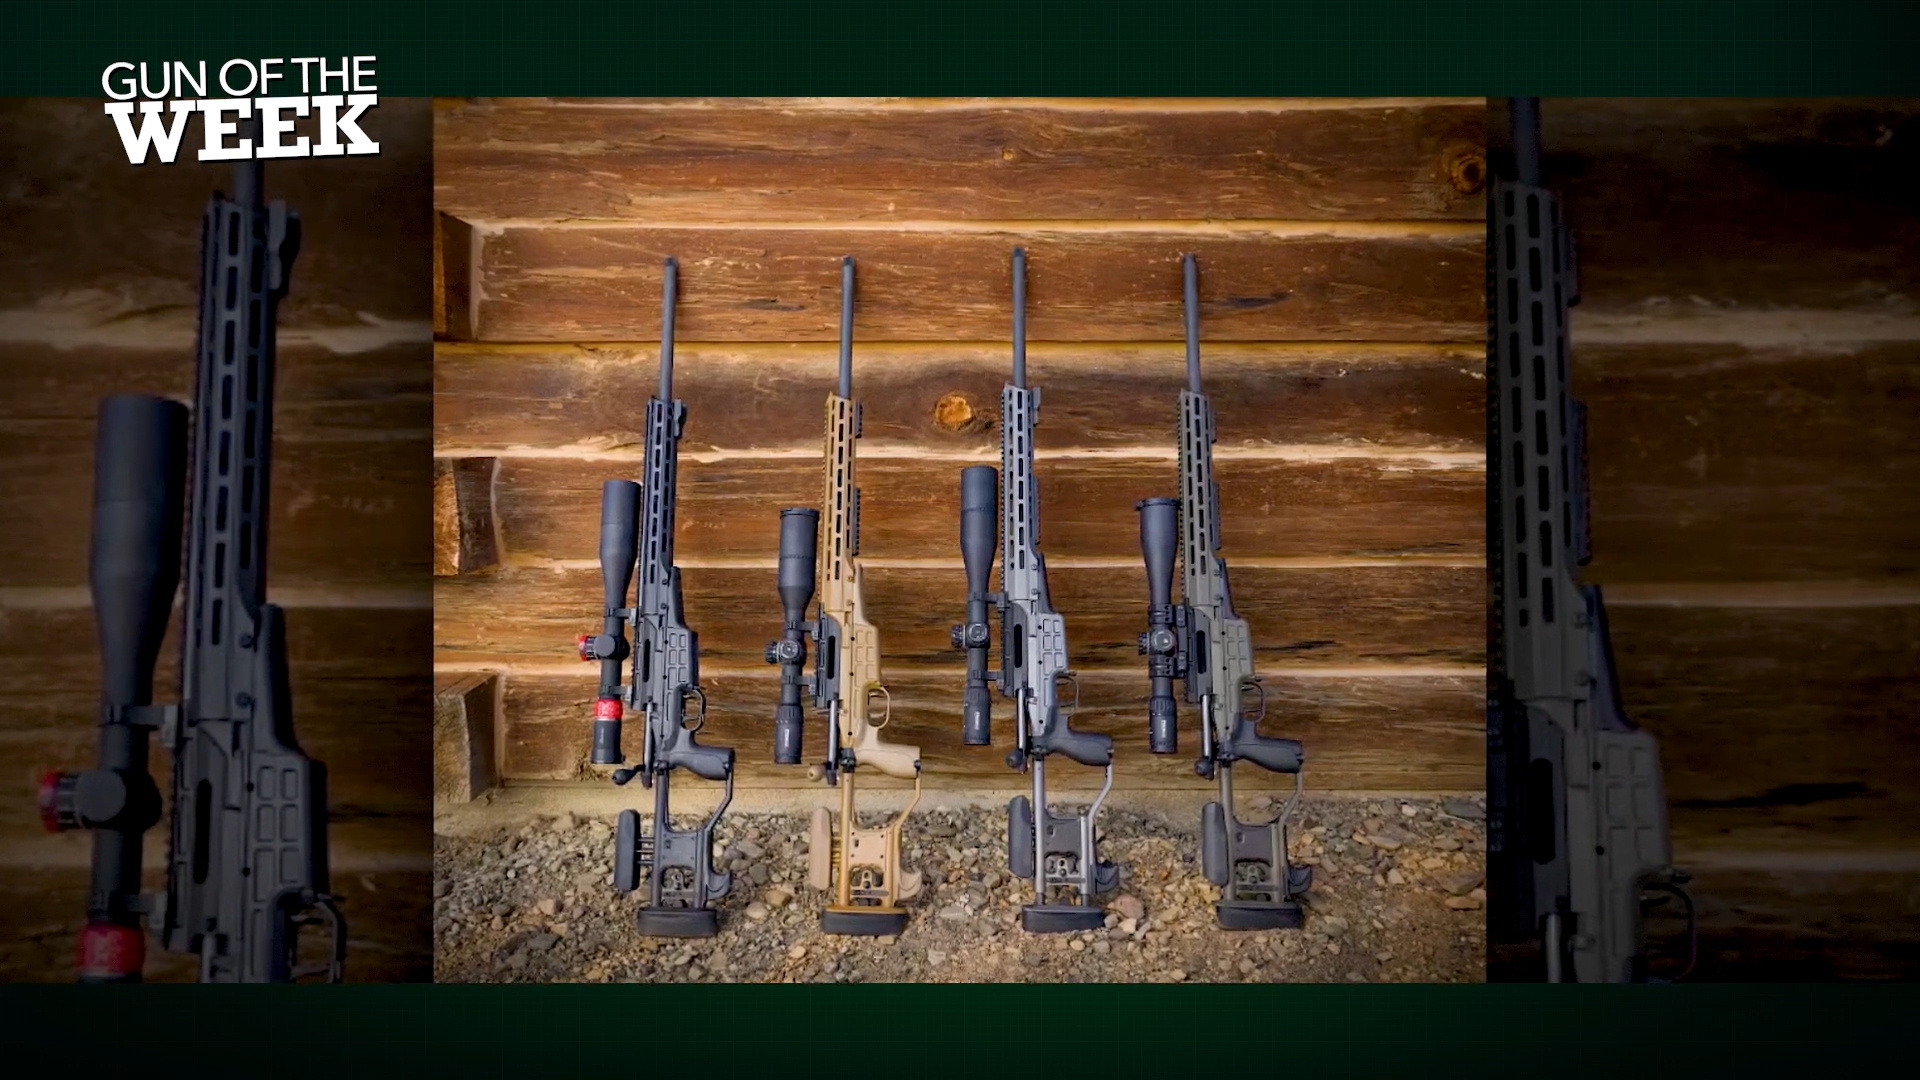 GUN OF THE WEEK SAKO TRG 22 A1 line bolt-action rifles vertical standing leaning wood wall